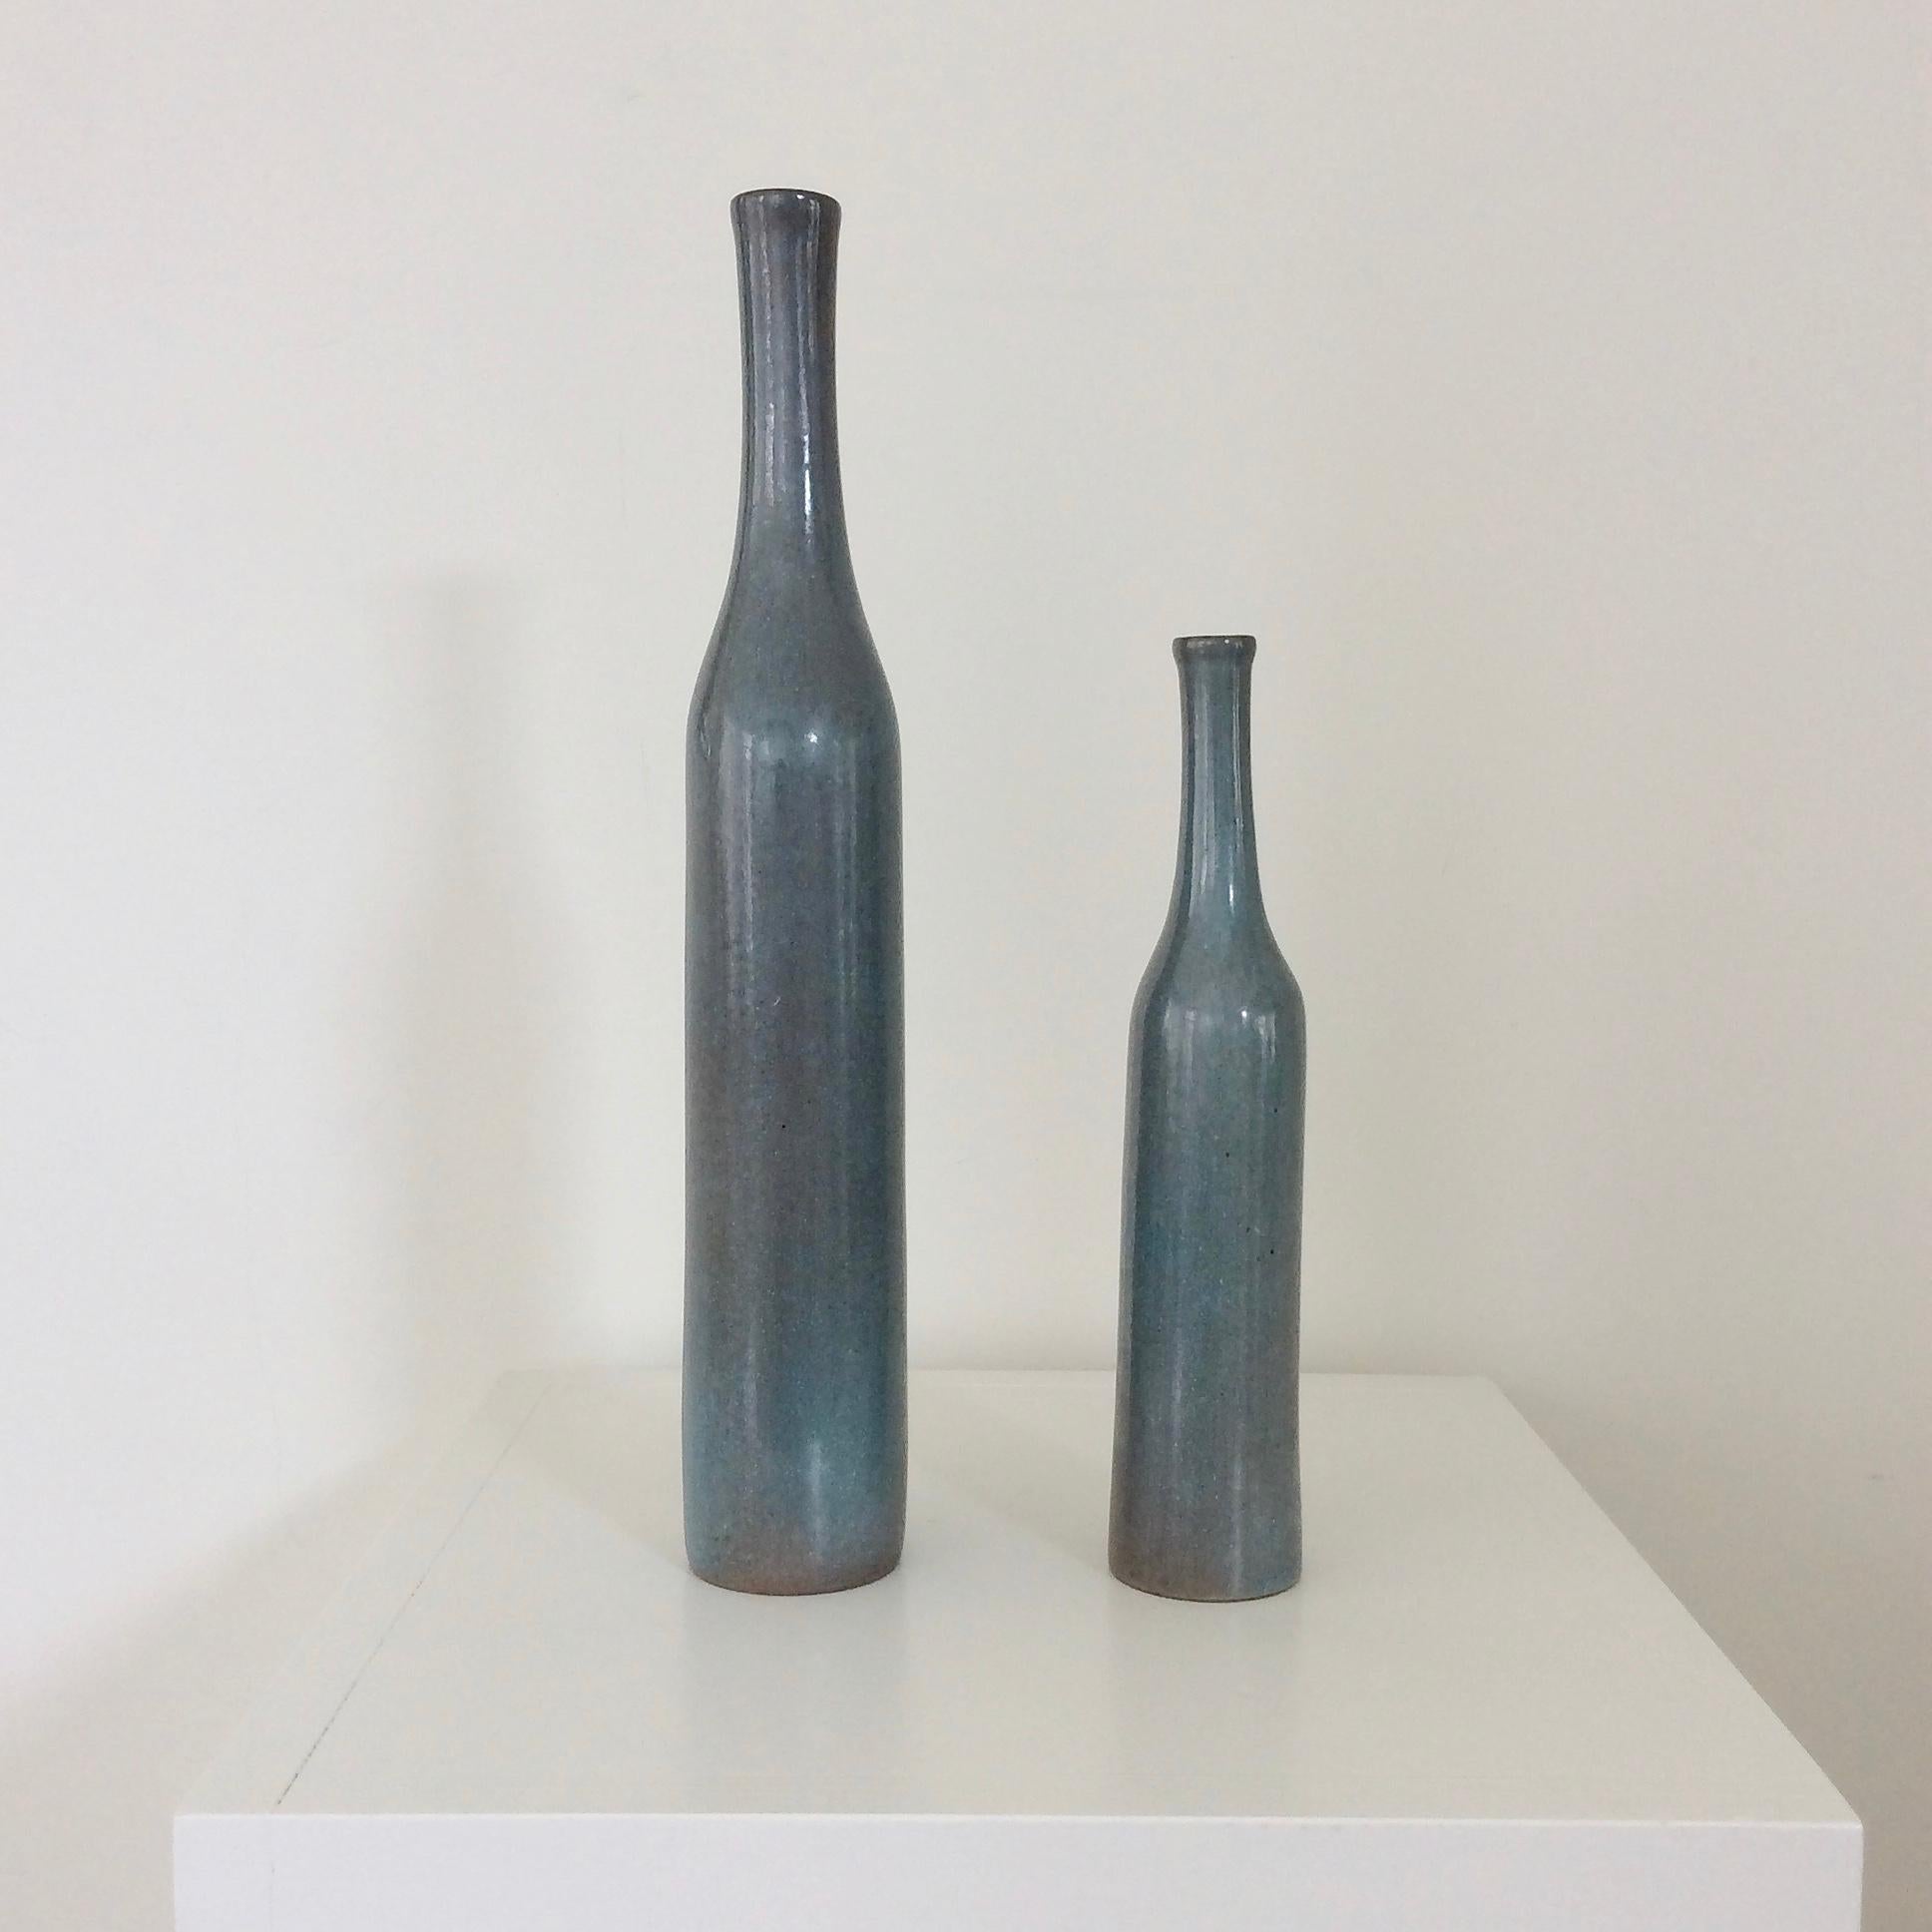 Pair of iconic bottles form by the French ceramic artists Jacques and Dani Ruelland, circa 1960, France.
Delicate shades of grey or pale blue glazed ceramic.
Both signed 